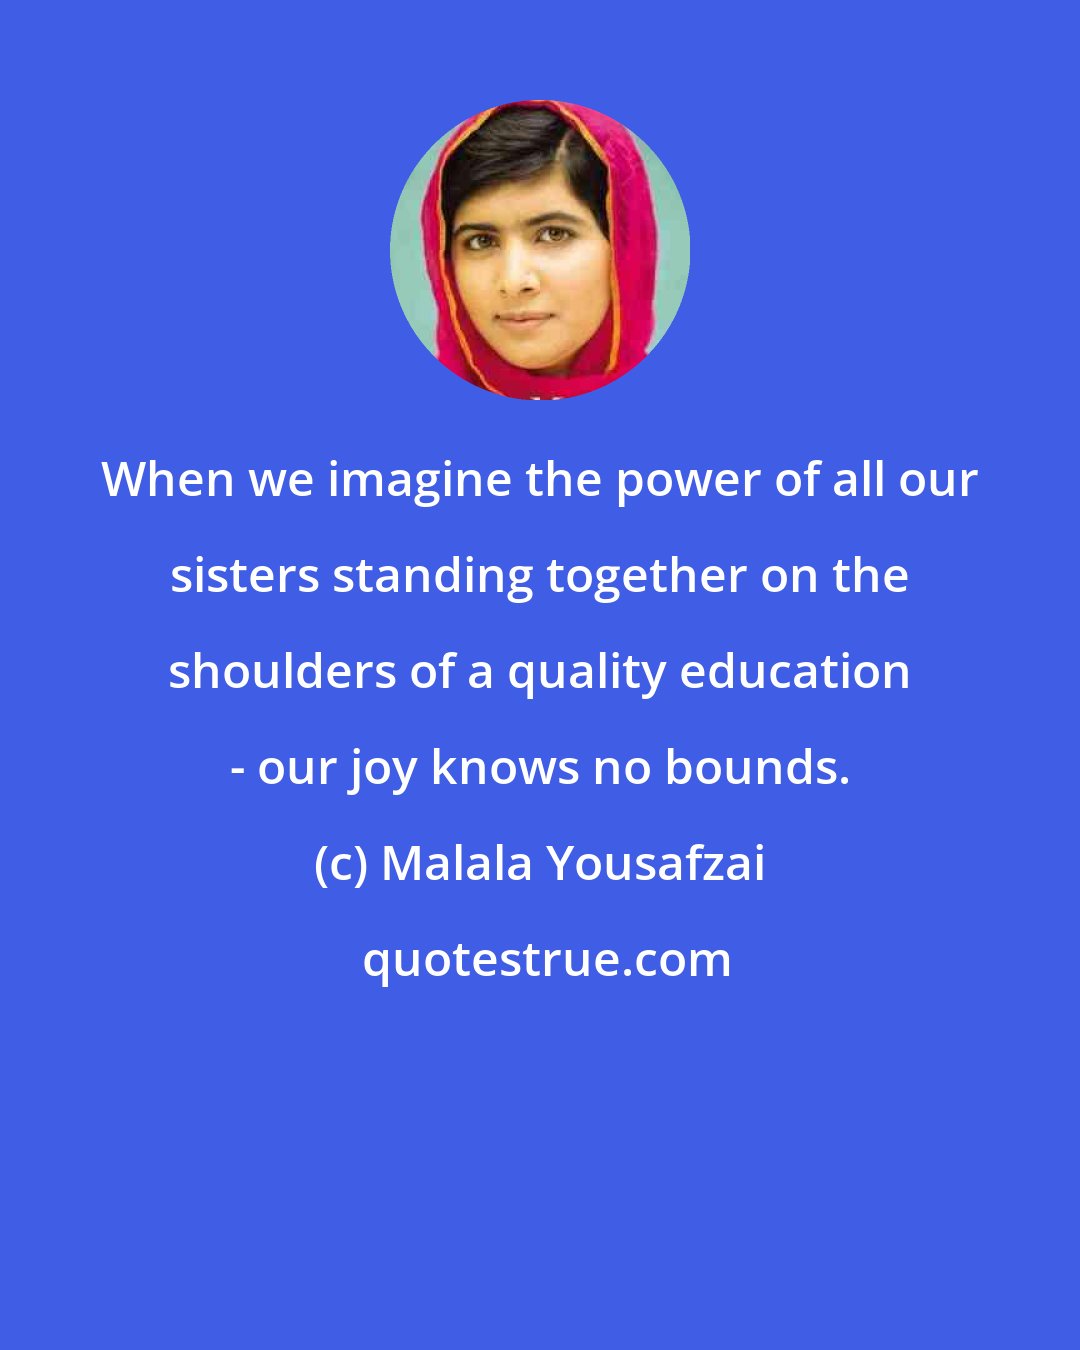 Malala Yousafzai: When we imagine the power of all our sisters standing together on the shoulders of a quality education - our joy knows no bounds.